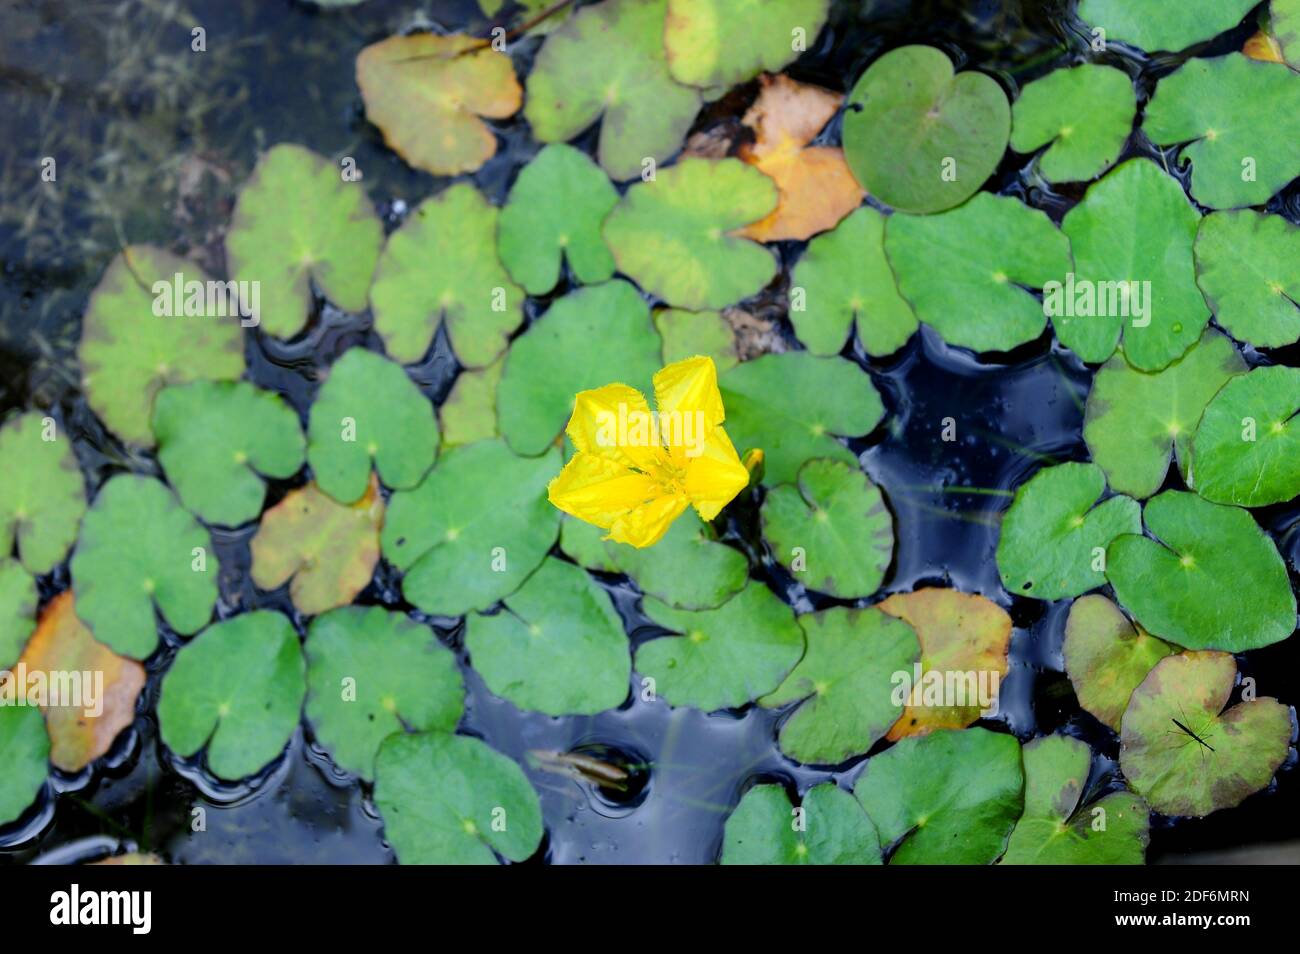 Fringed water lily or floating heart (Nymphoides peltata) is an aquatic perennial herb native to Asia and Mediterranean region. Stock Photo